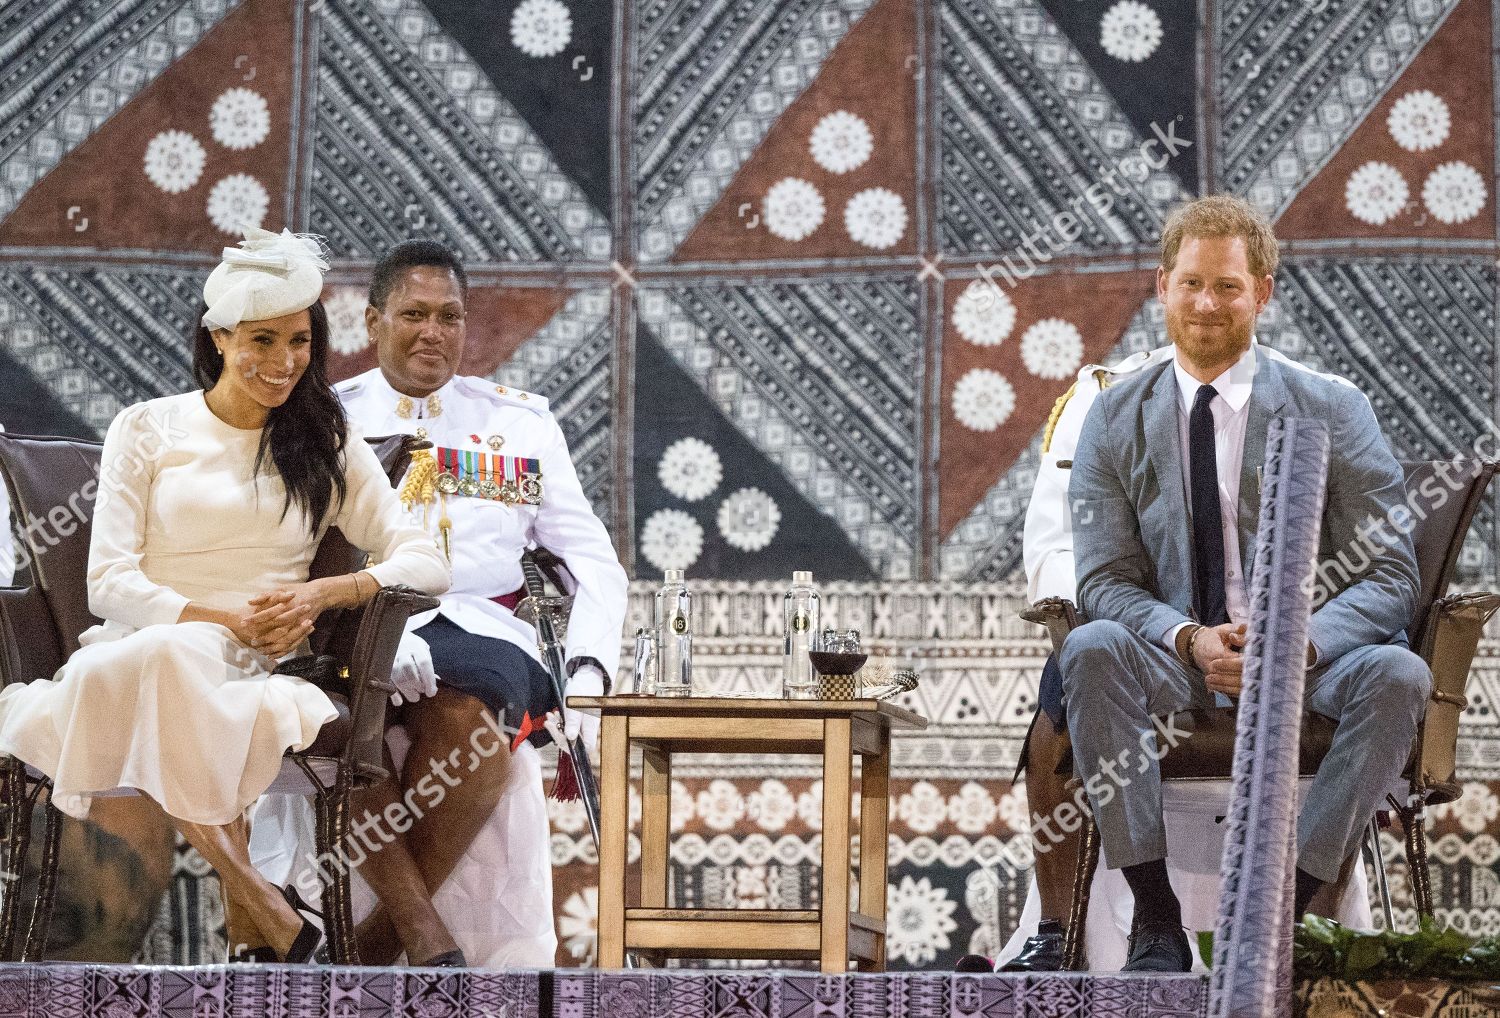 prince-harry-and-meghan-duchess-of-sussex-tour-of-fiji-shutterstock-editorial-9941093z.jpg